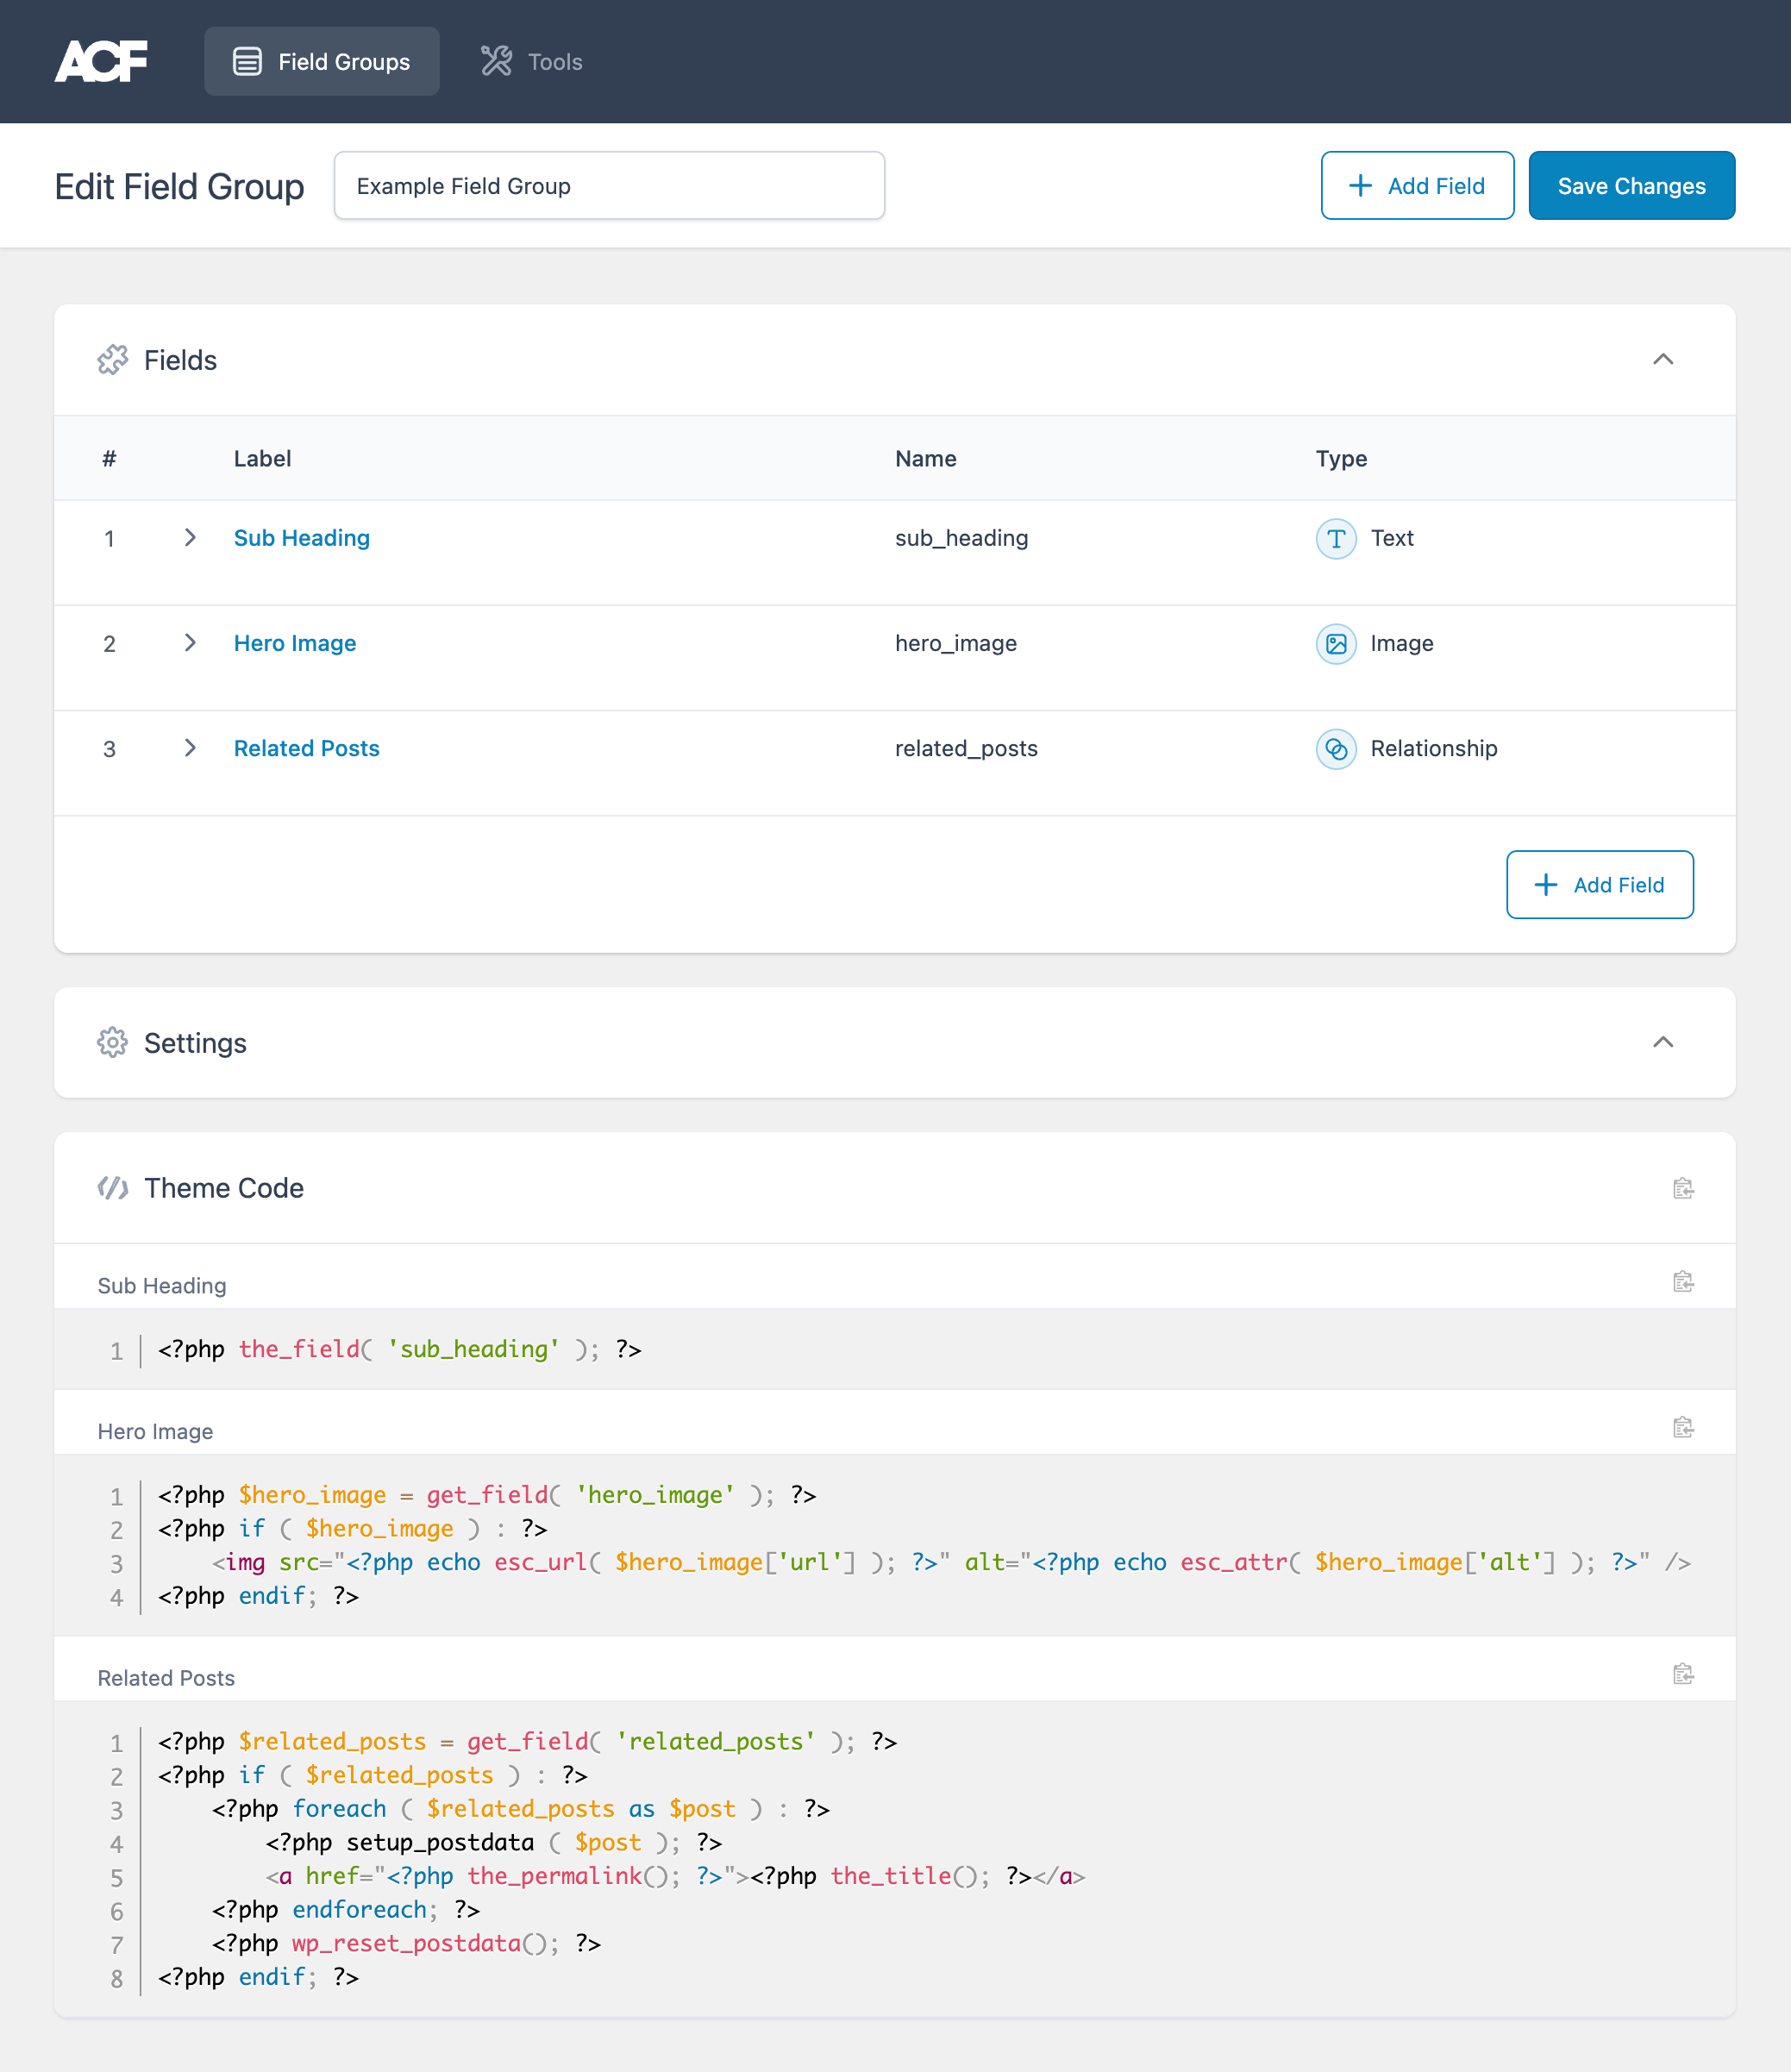 The code required to implement each field is displayed for you in the Theme Code section.